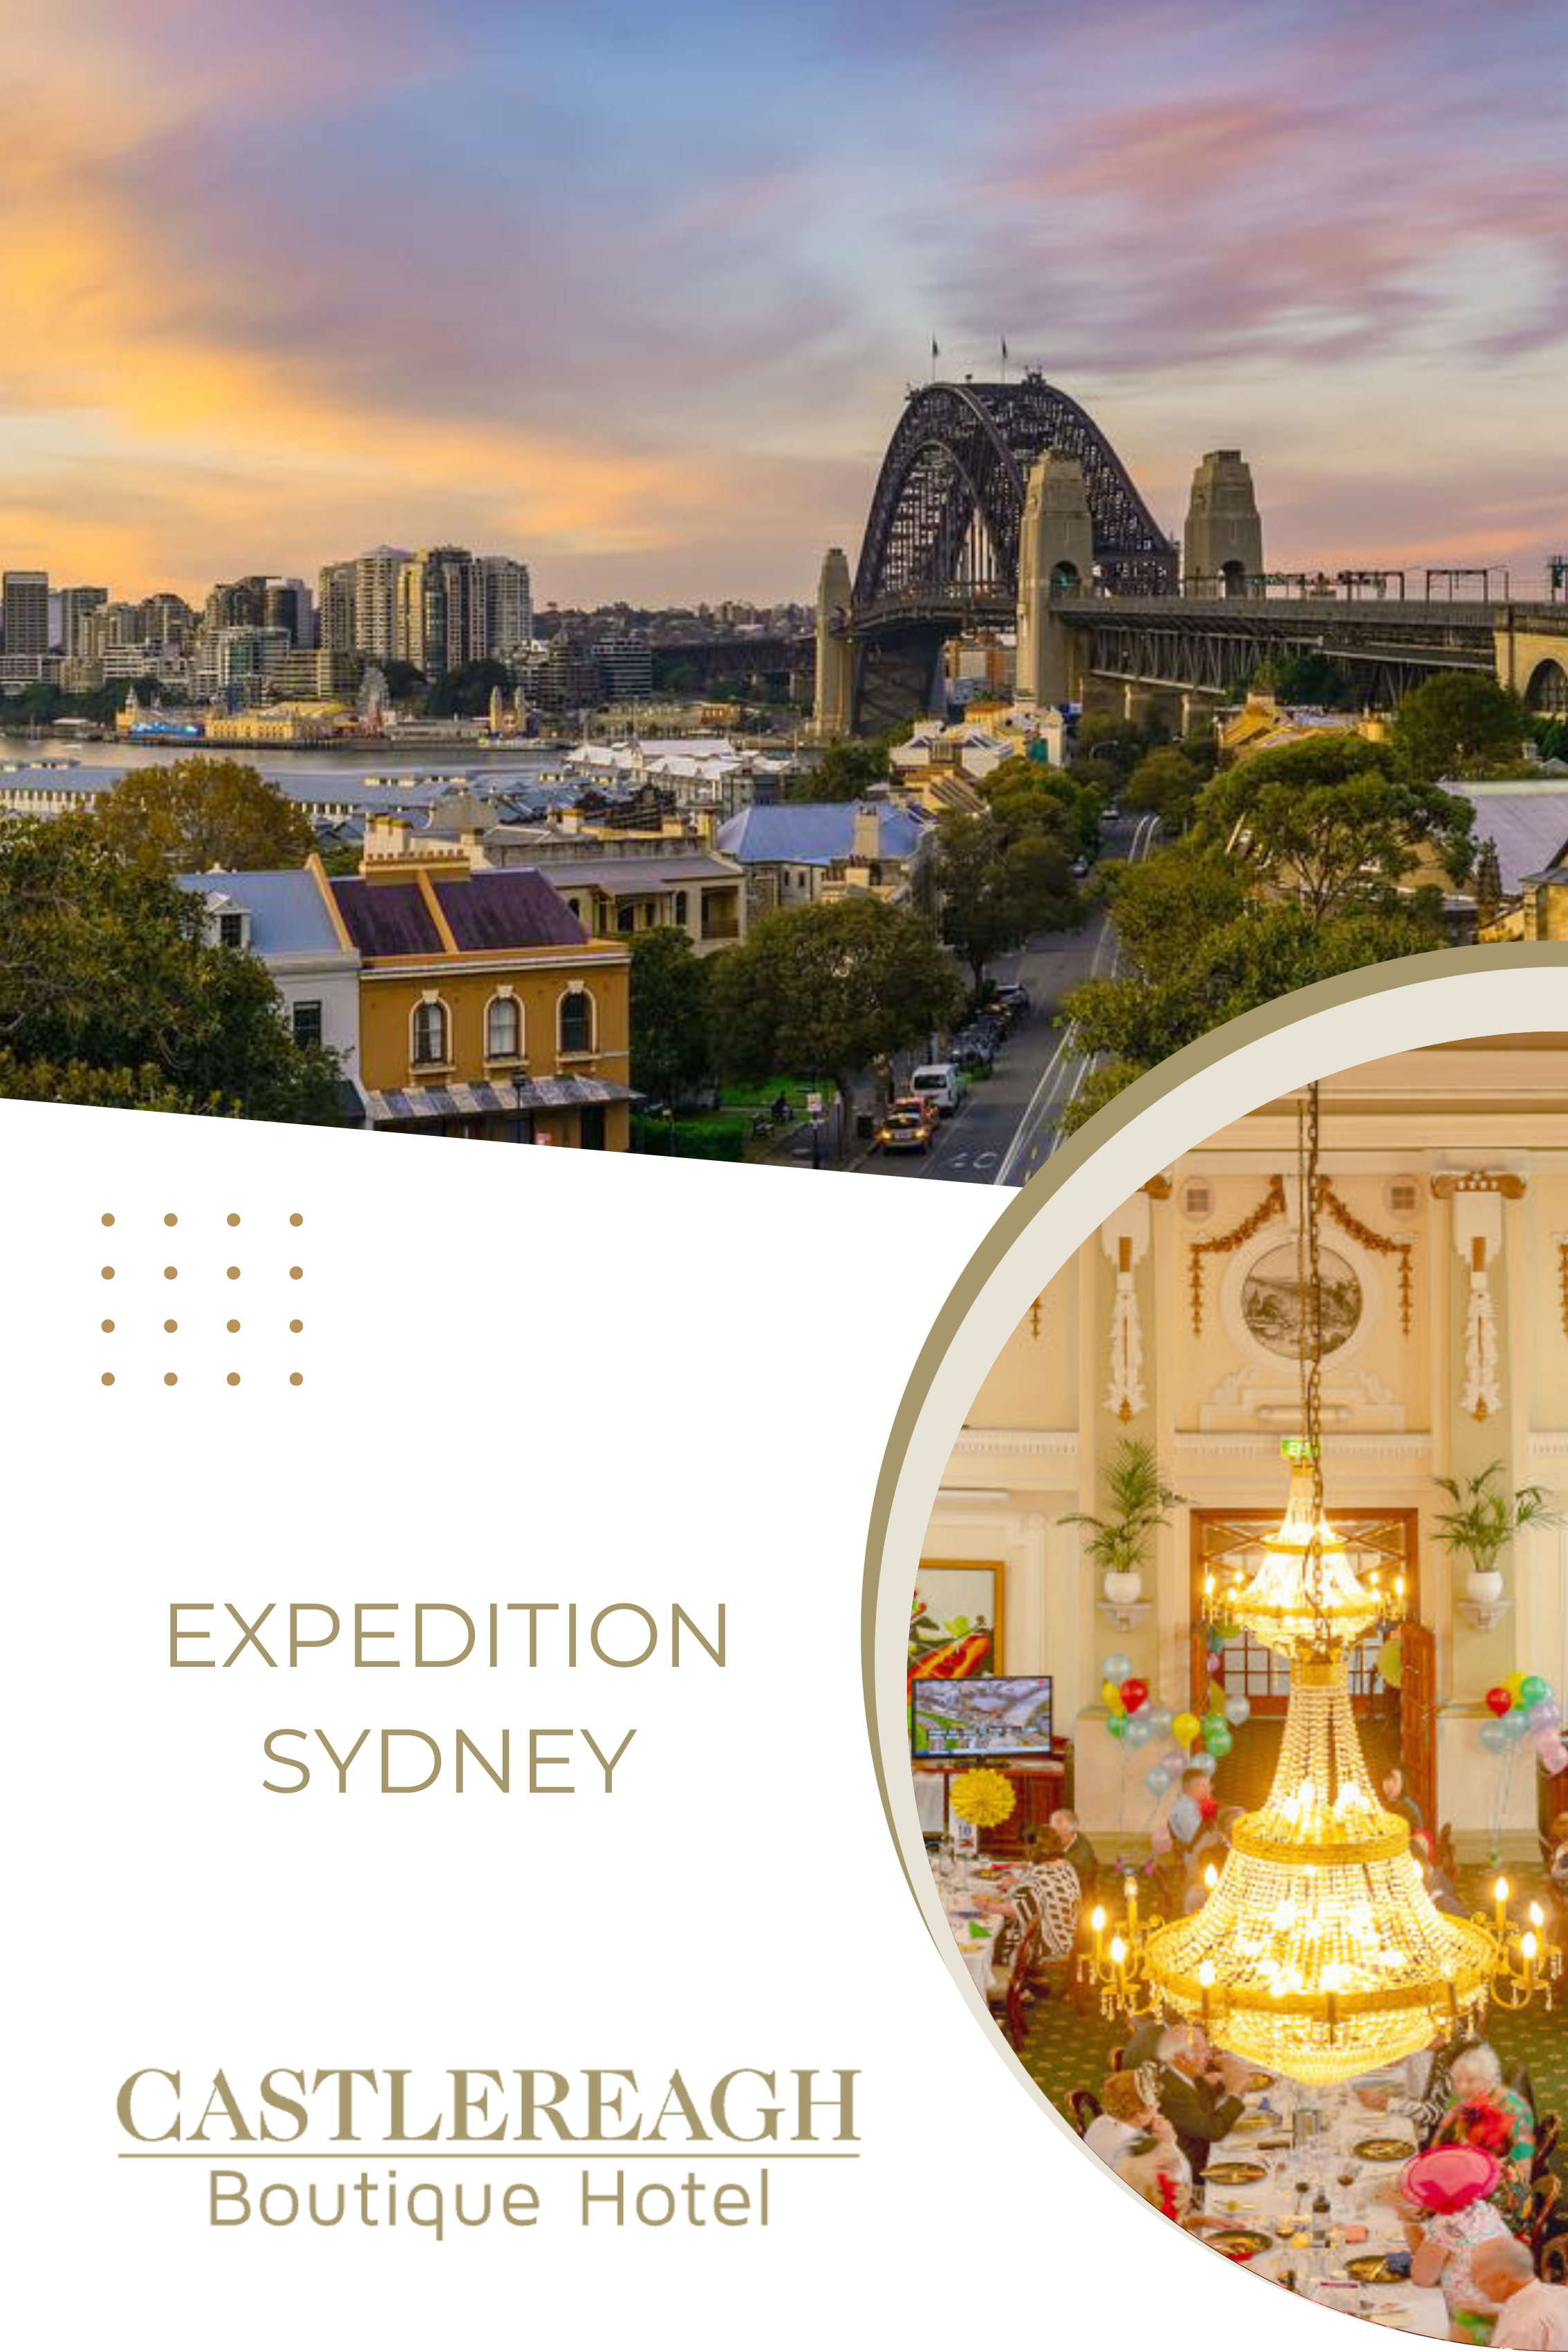 Expedition Sydney with Castlereagh Boutique Hotel